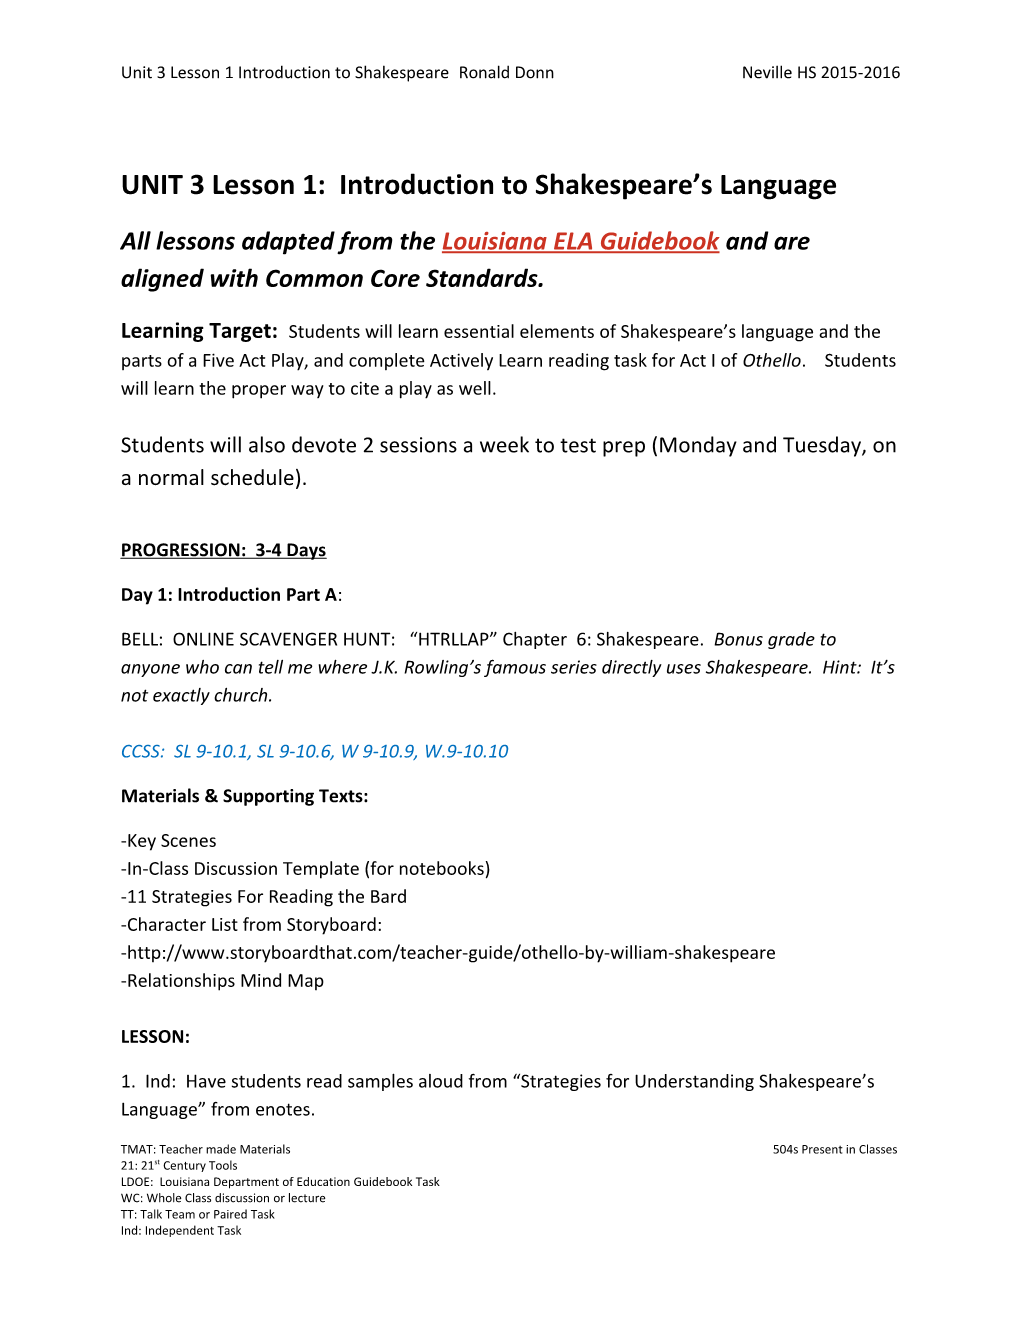 UNIT 3 Lesson 1: Introduction to Shakespeare S Language